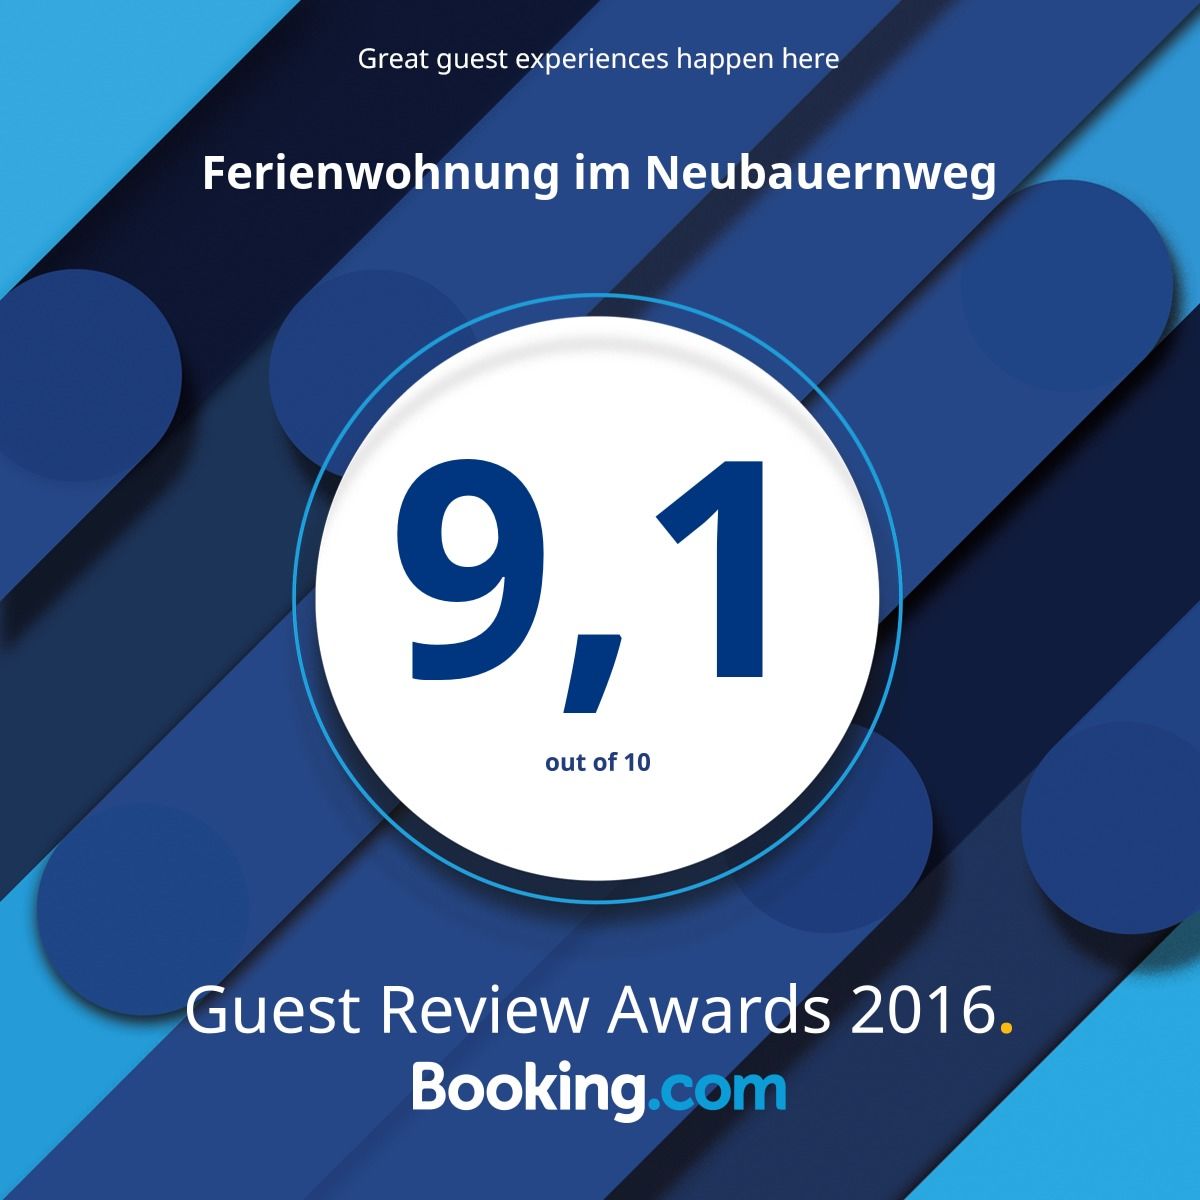 Guest Review Awards 2016 booking.com 9,1